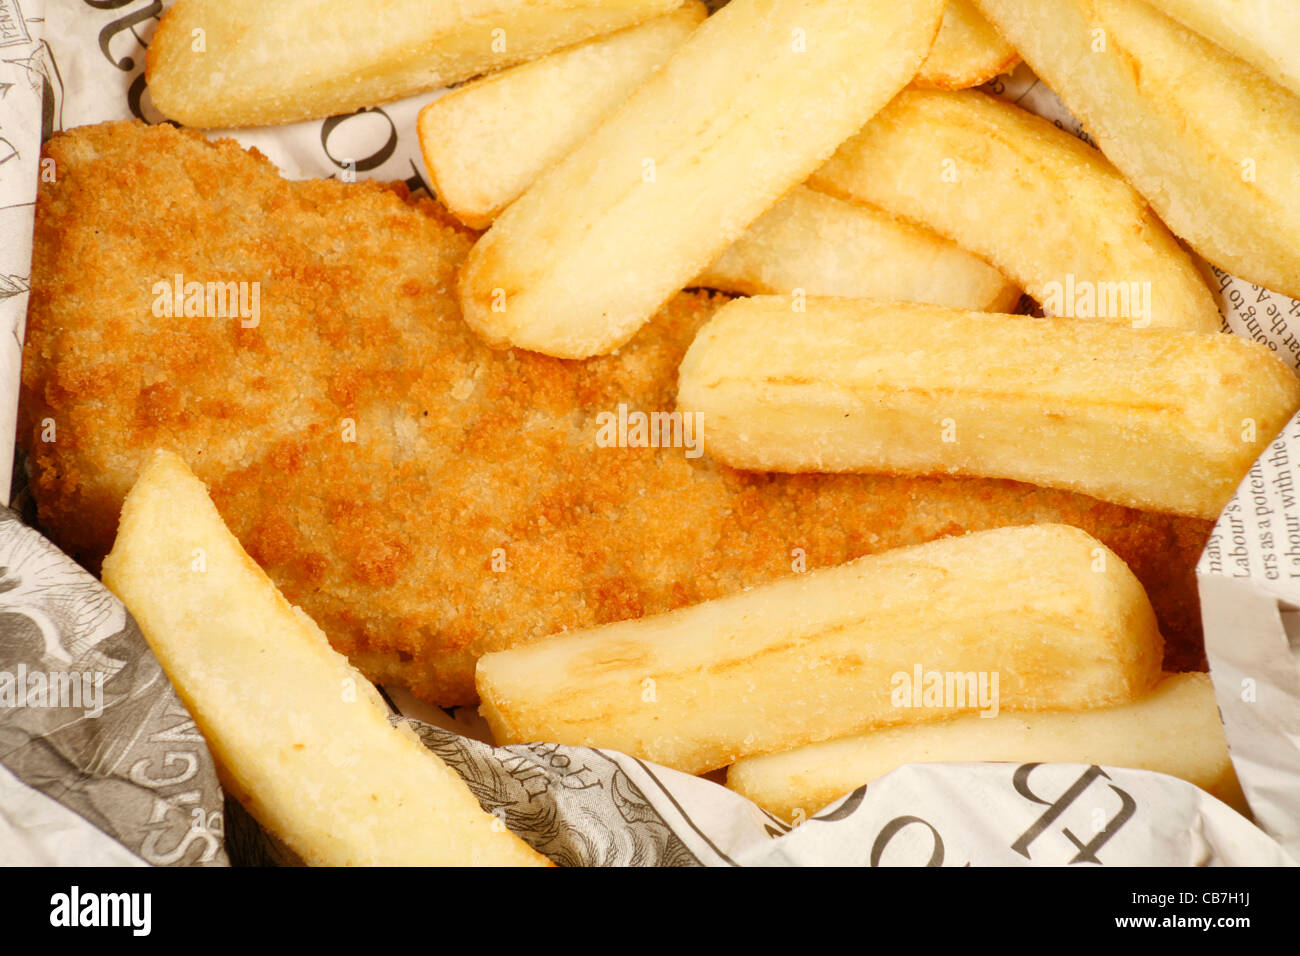 Fish and Chips Banque D'Images